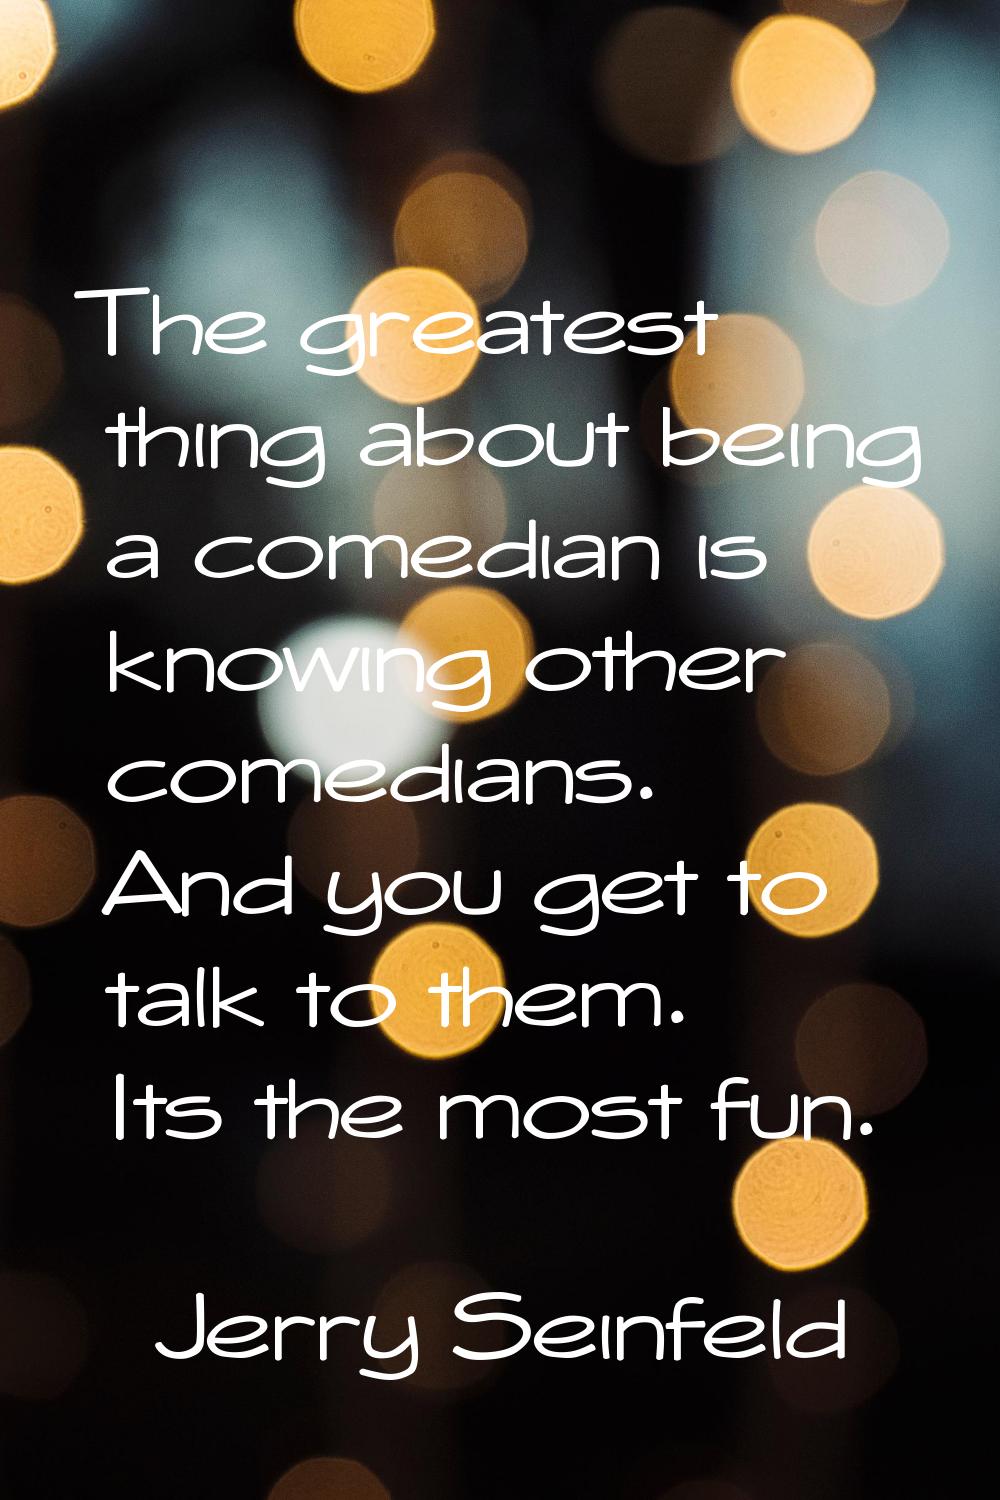 The greatest thing about being a comedian is knowing other comedians. And you get to talk to them. 